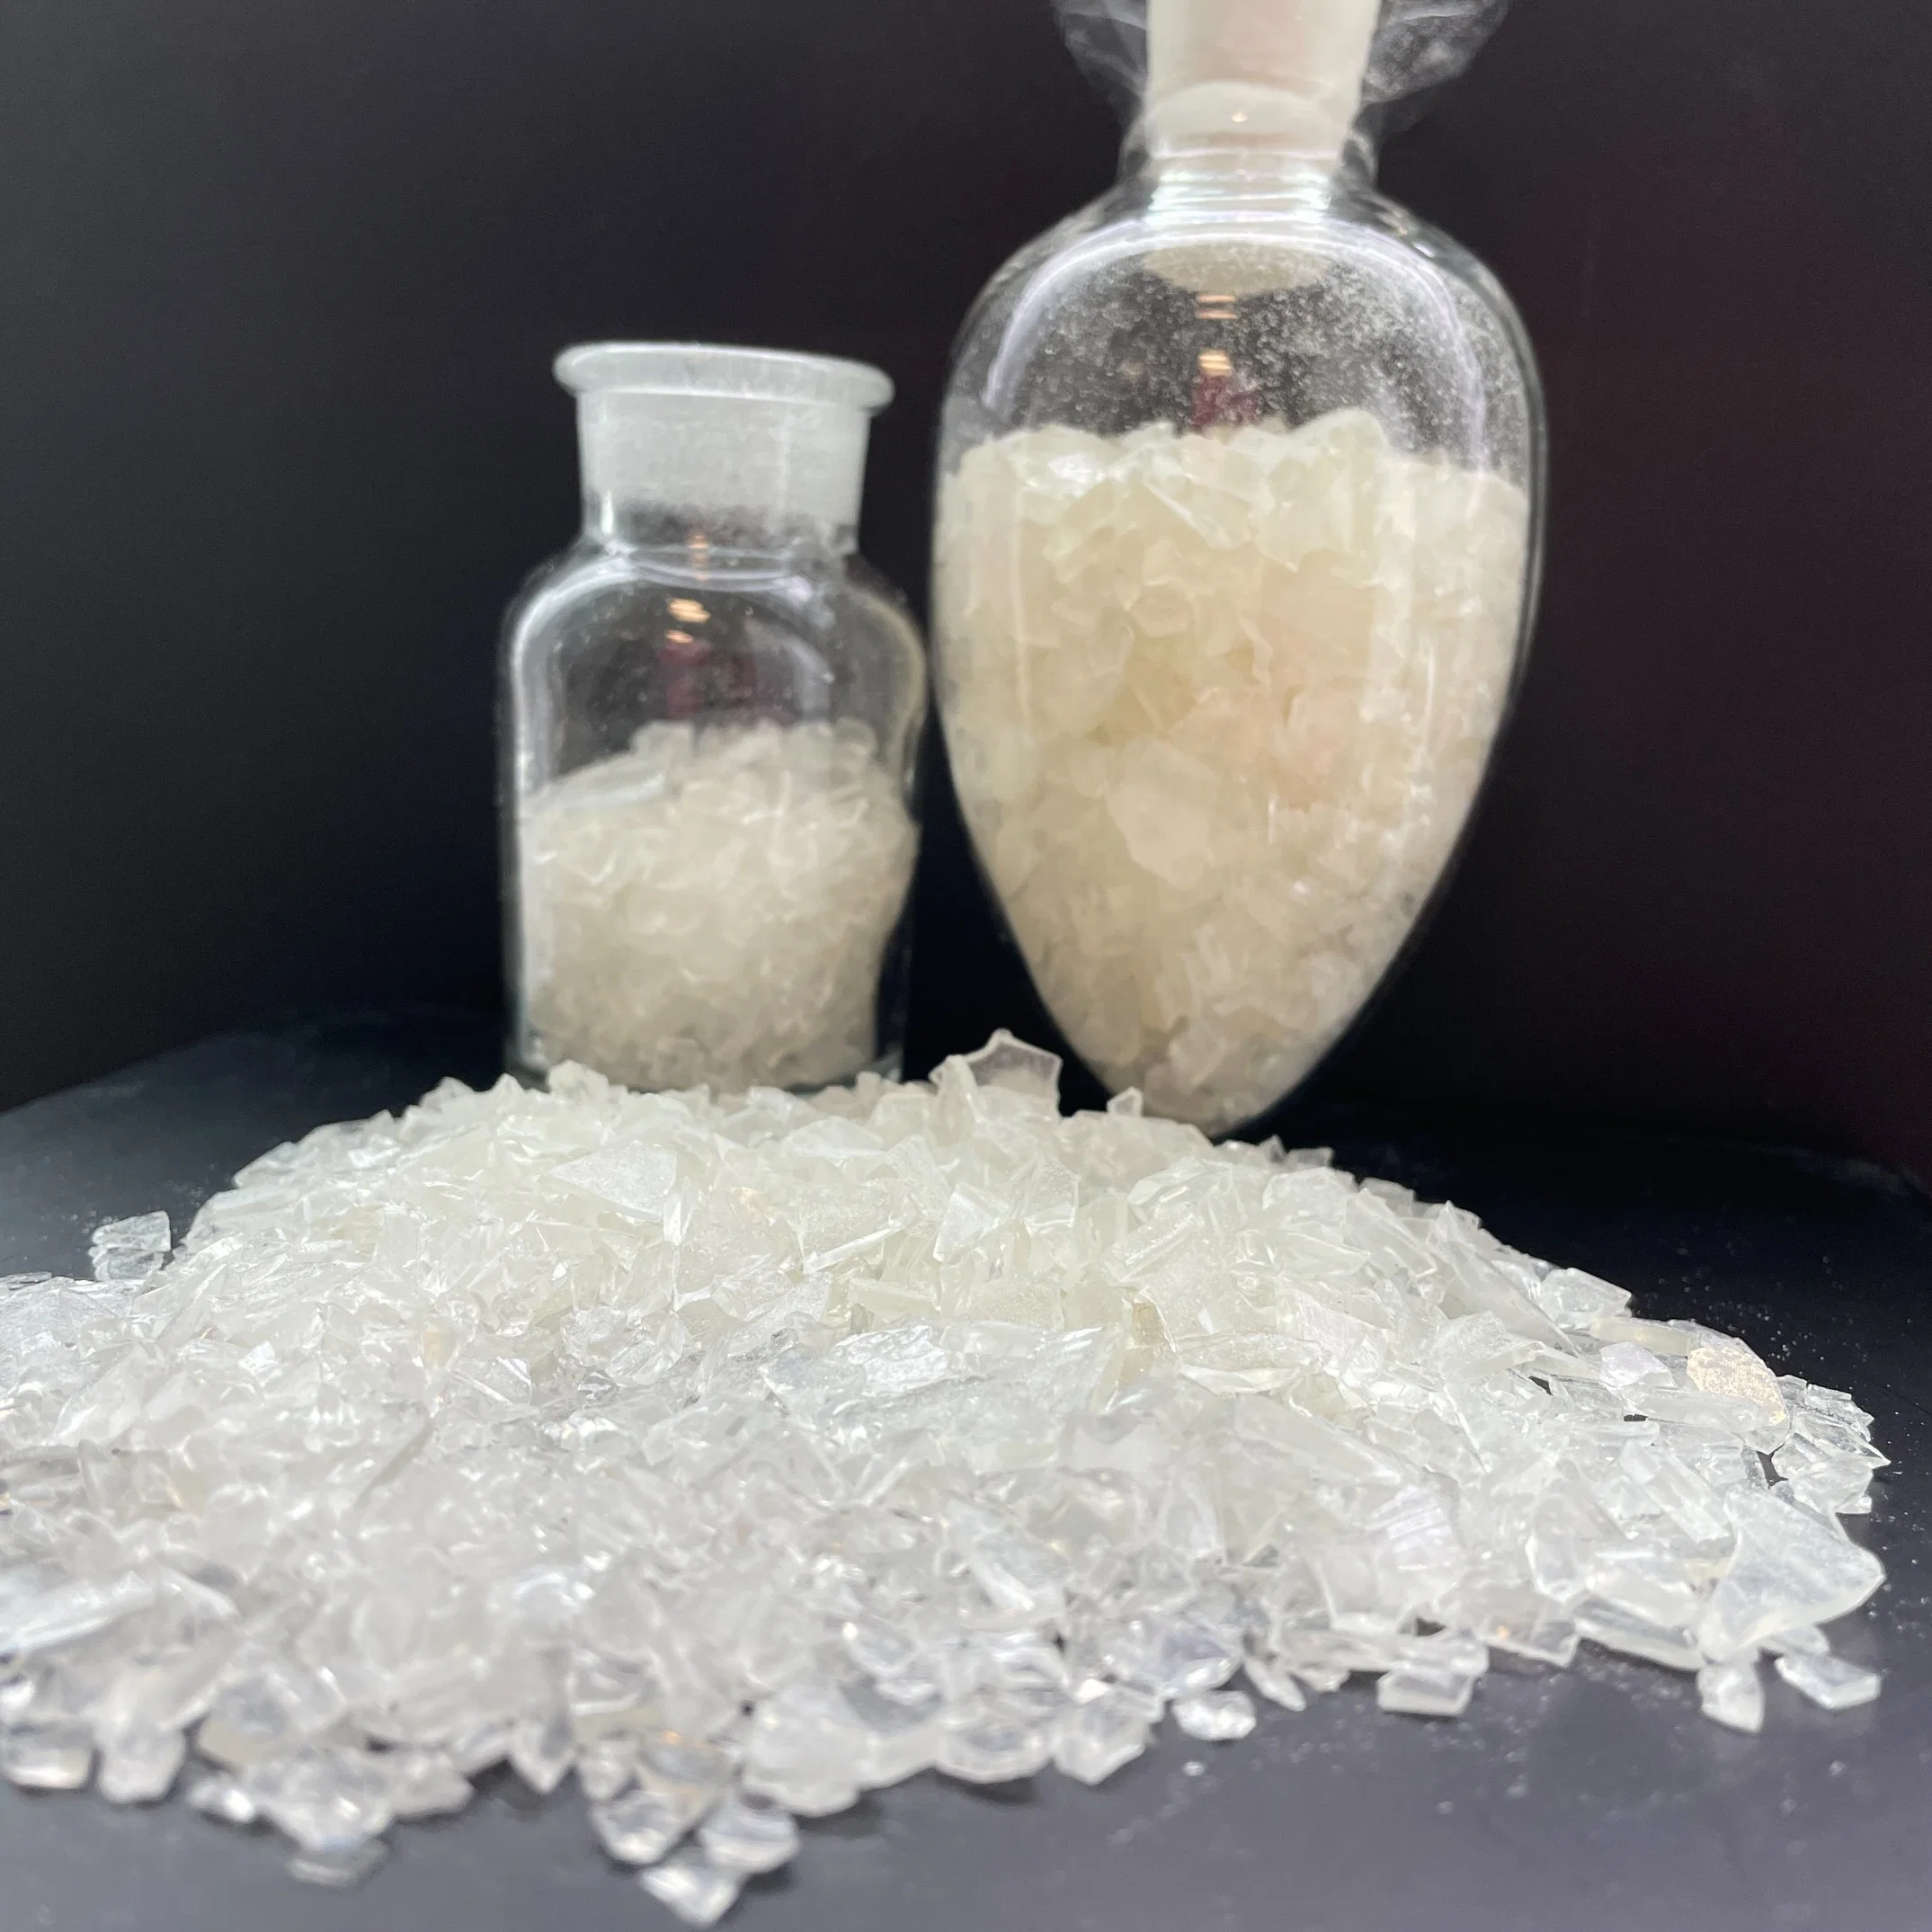 Tgic Polyester Resin with Good Flow and High Gloss Thermosetting Polymer